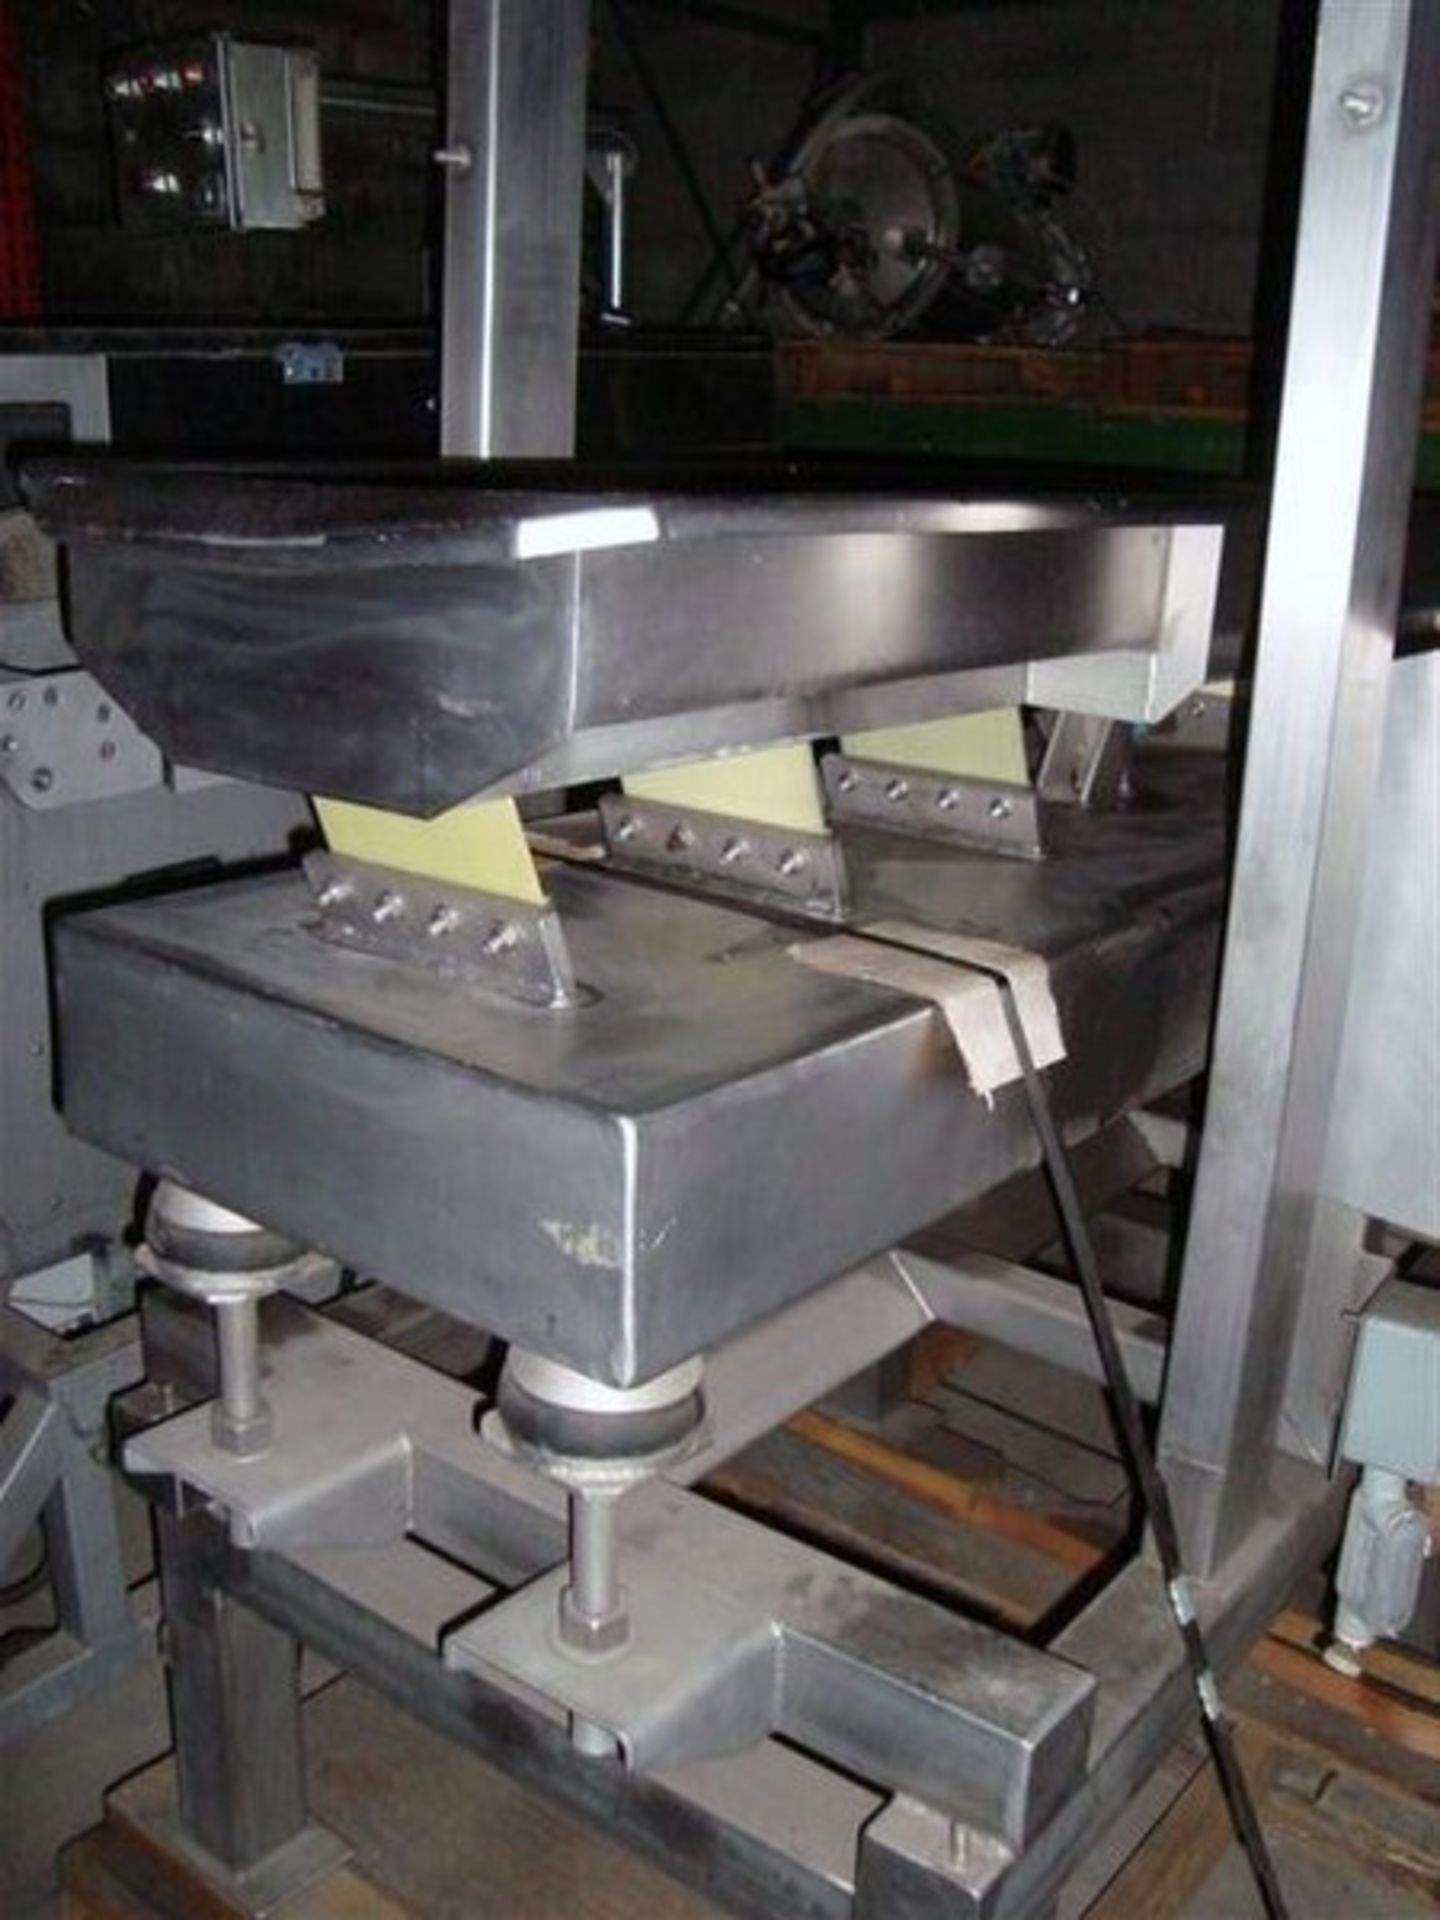 Smalley Vibratory S/S Feeder Conveyor, Model 1-V-015-007-SS-USDA, S/N 9108, Aprox.- 15" W x 84" L - Image 2 of 6